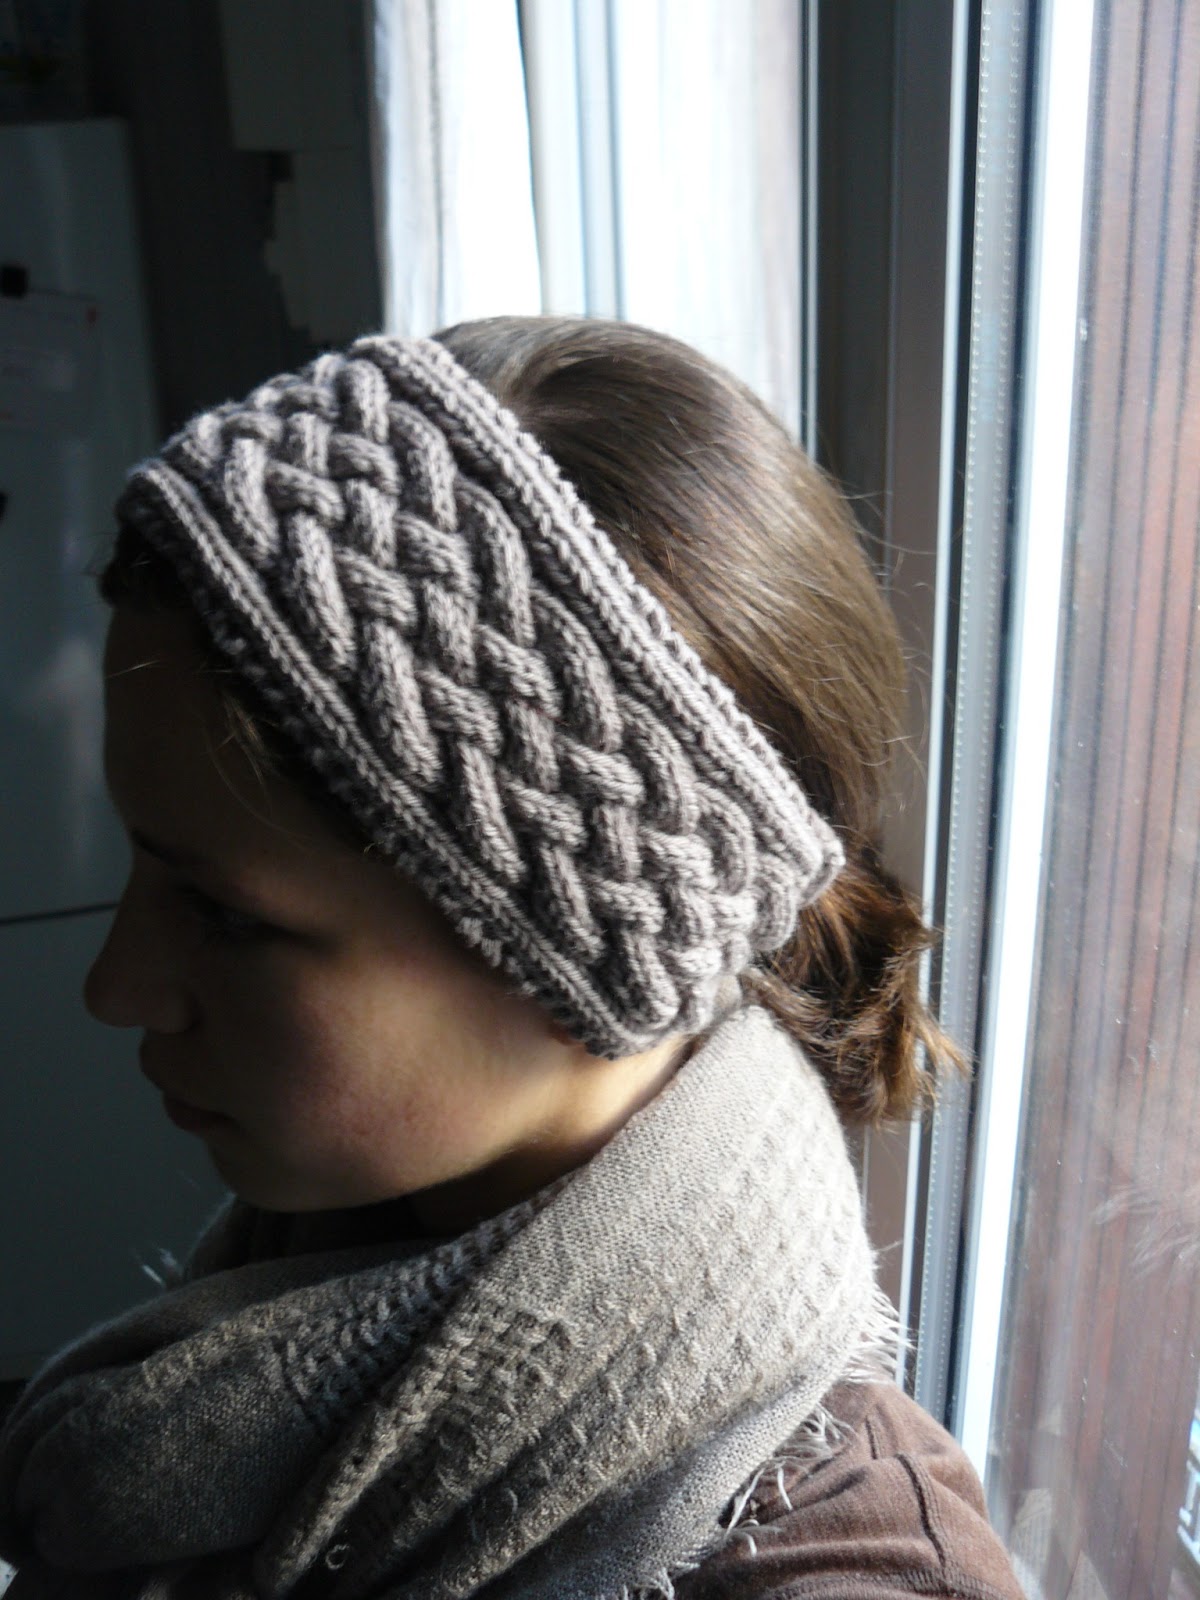 Download The Woven Home: Knitting Projects: Cabled Headband